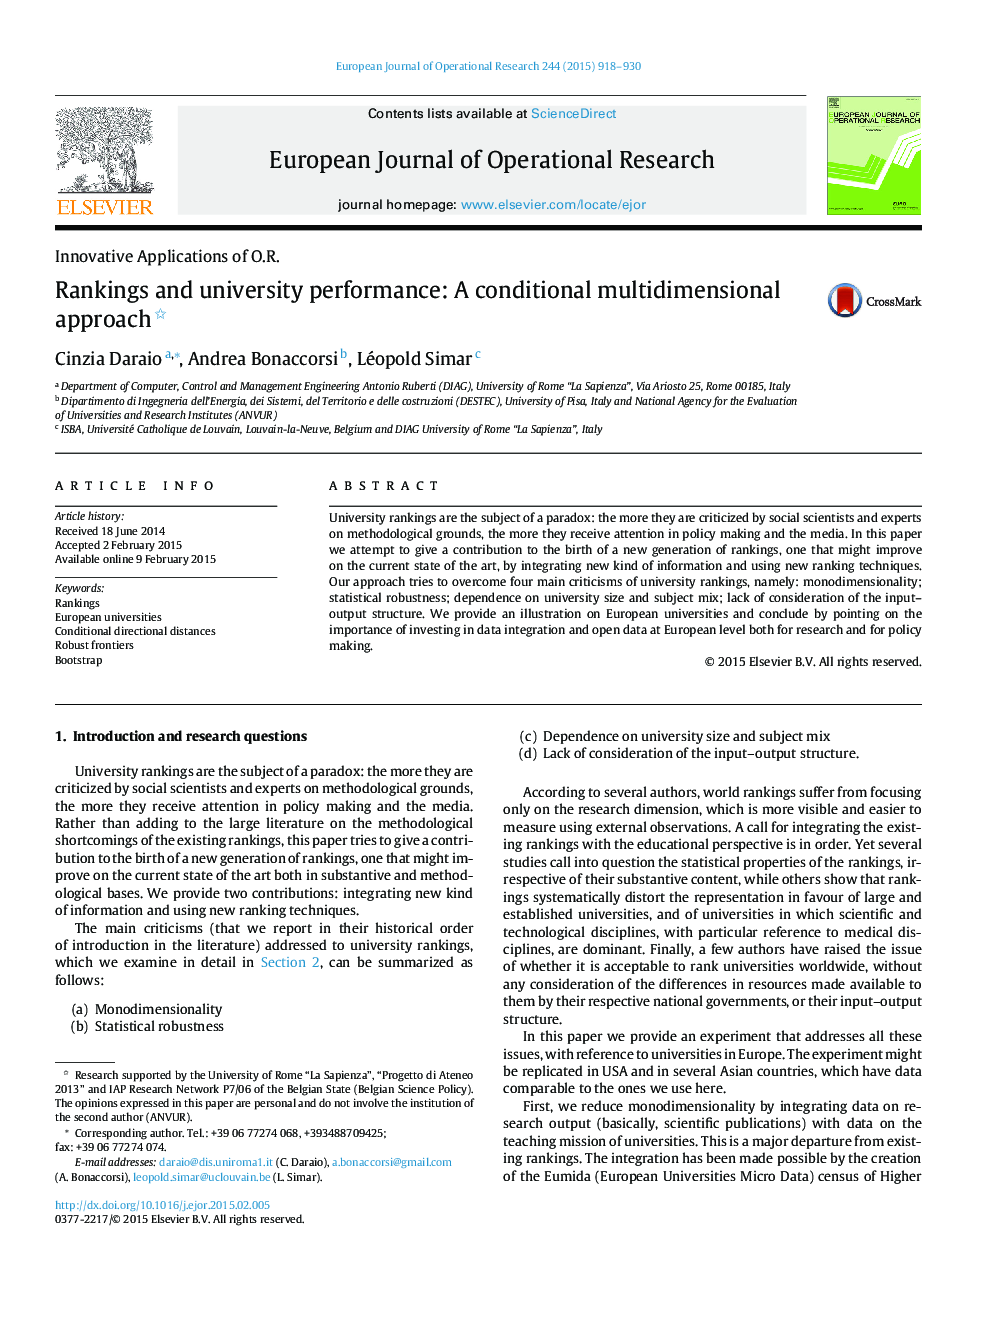 Rankings and university performance: A conditional multidimensional approach 